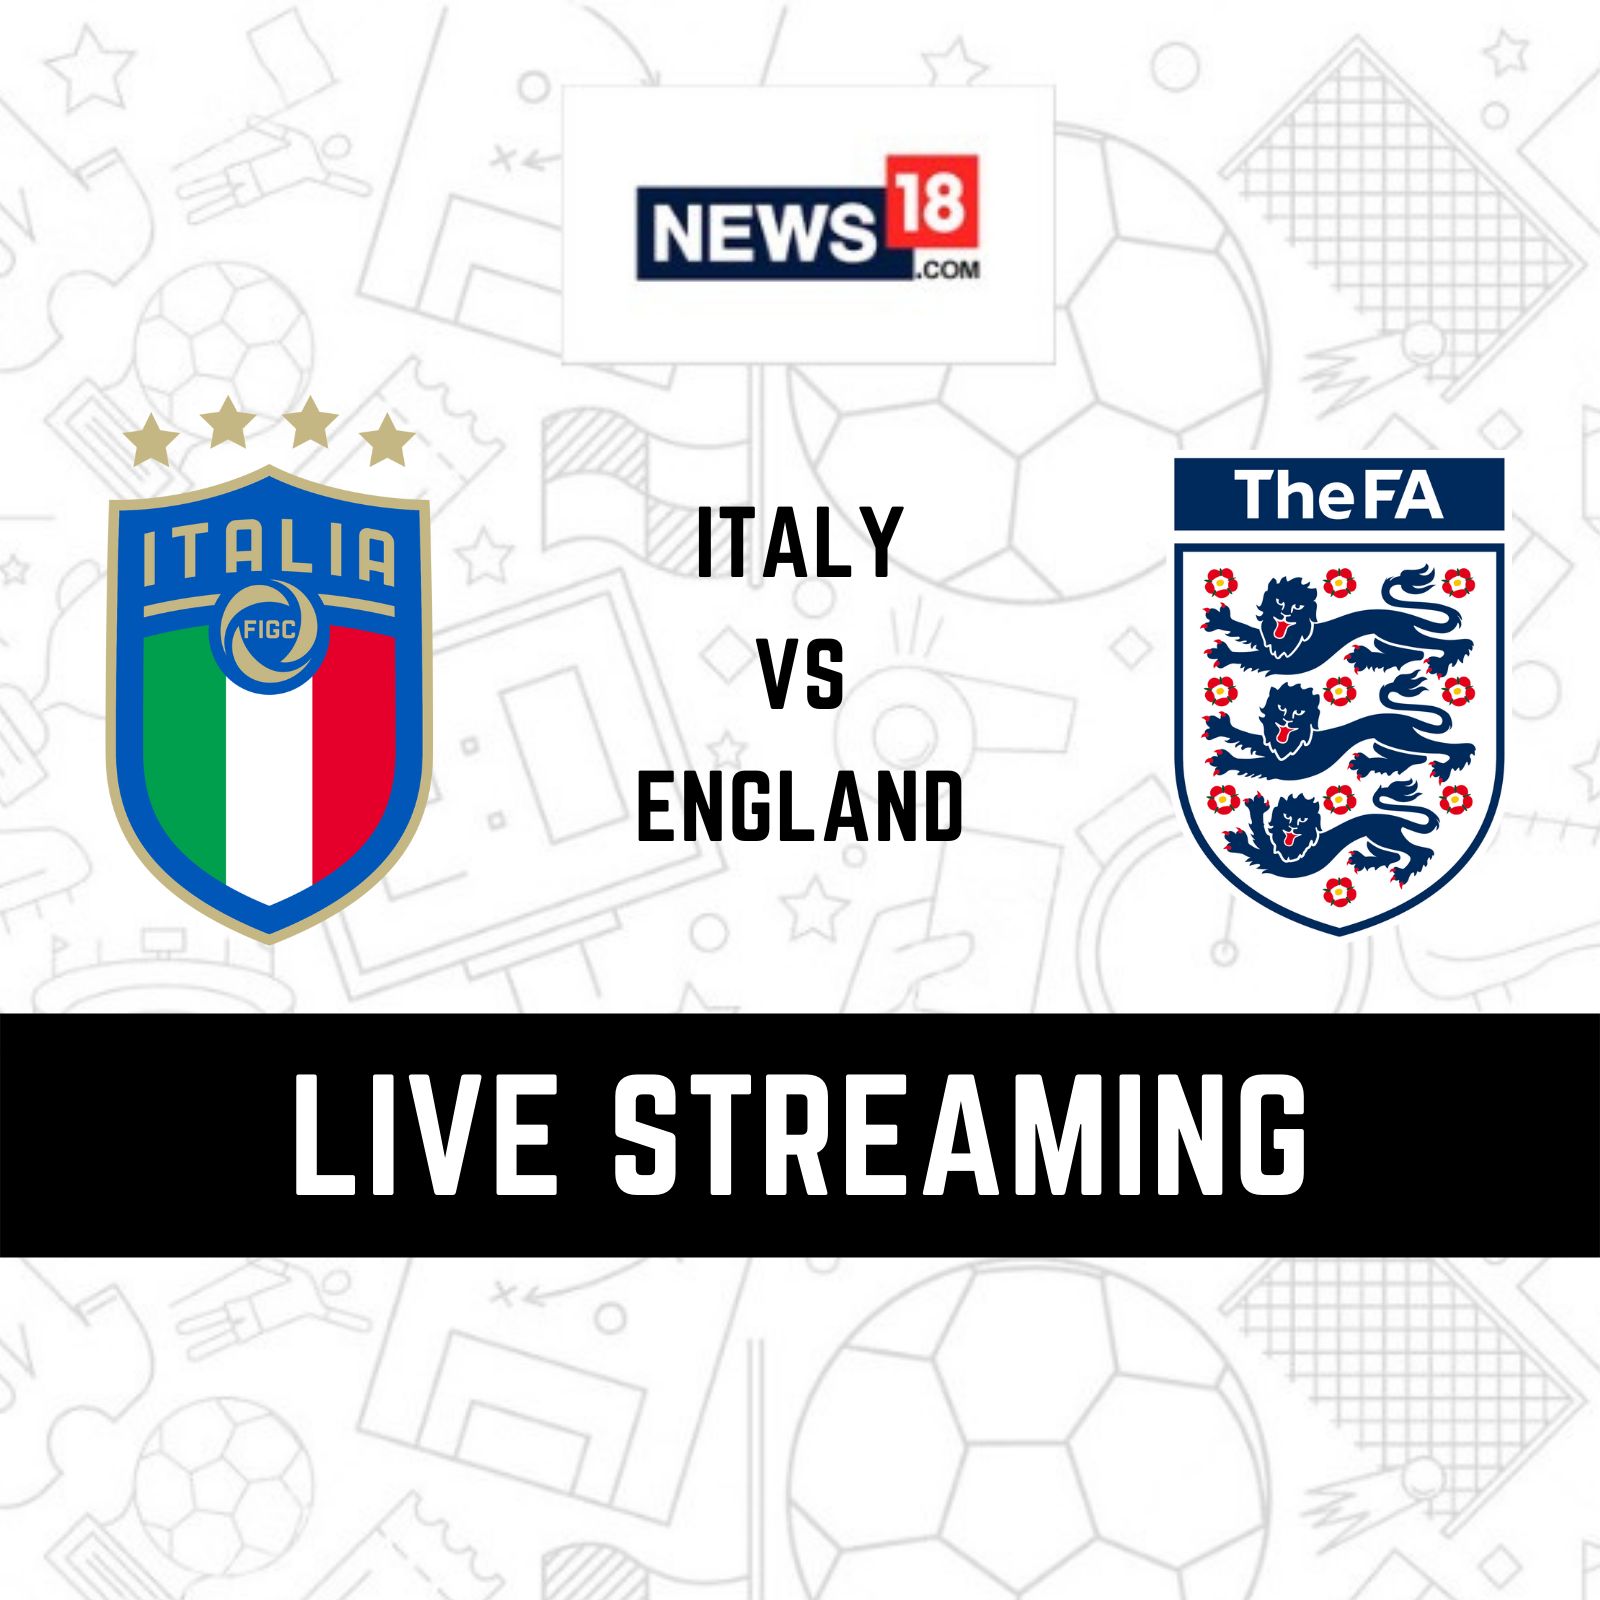 Italy vs England Live Streaming When and Where to Watch Italy vs England UEFA Nations League Live Coverage on Live TV Online